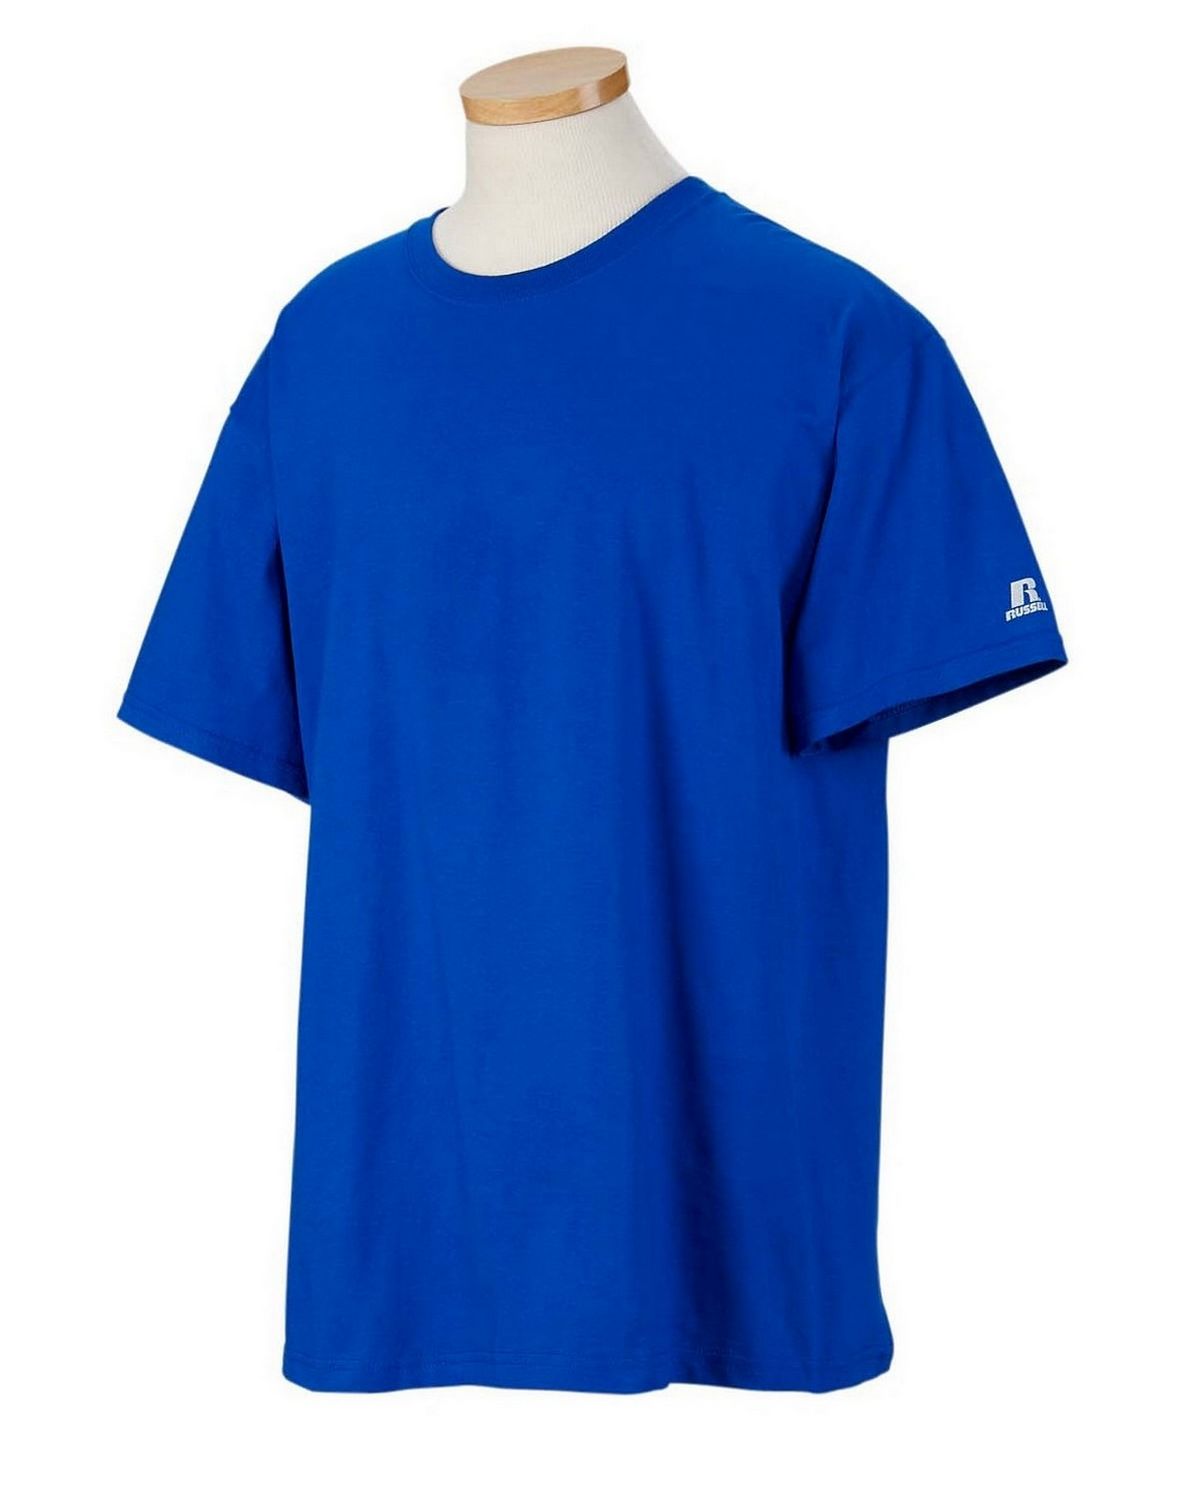 Russell Athletic 67014M Short-Sleeve Cotton T-Shirt at ApparelGator.com